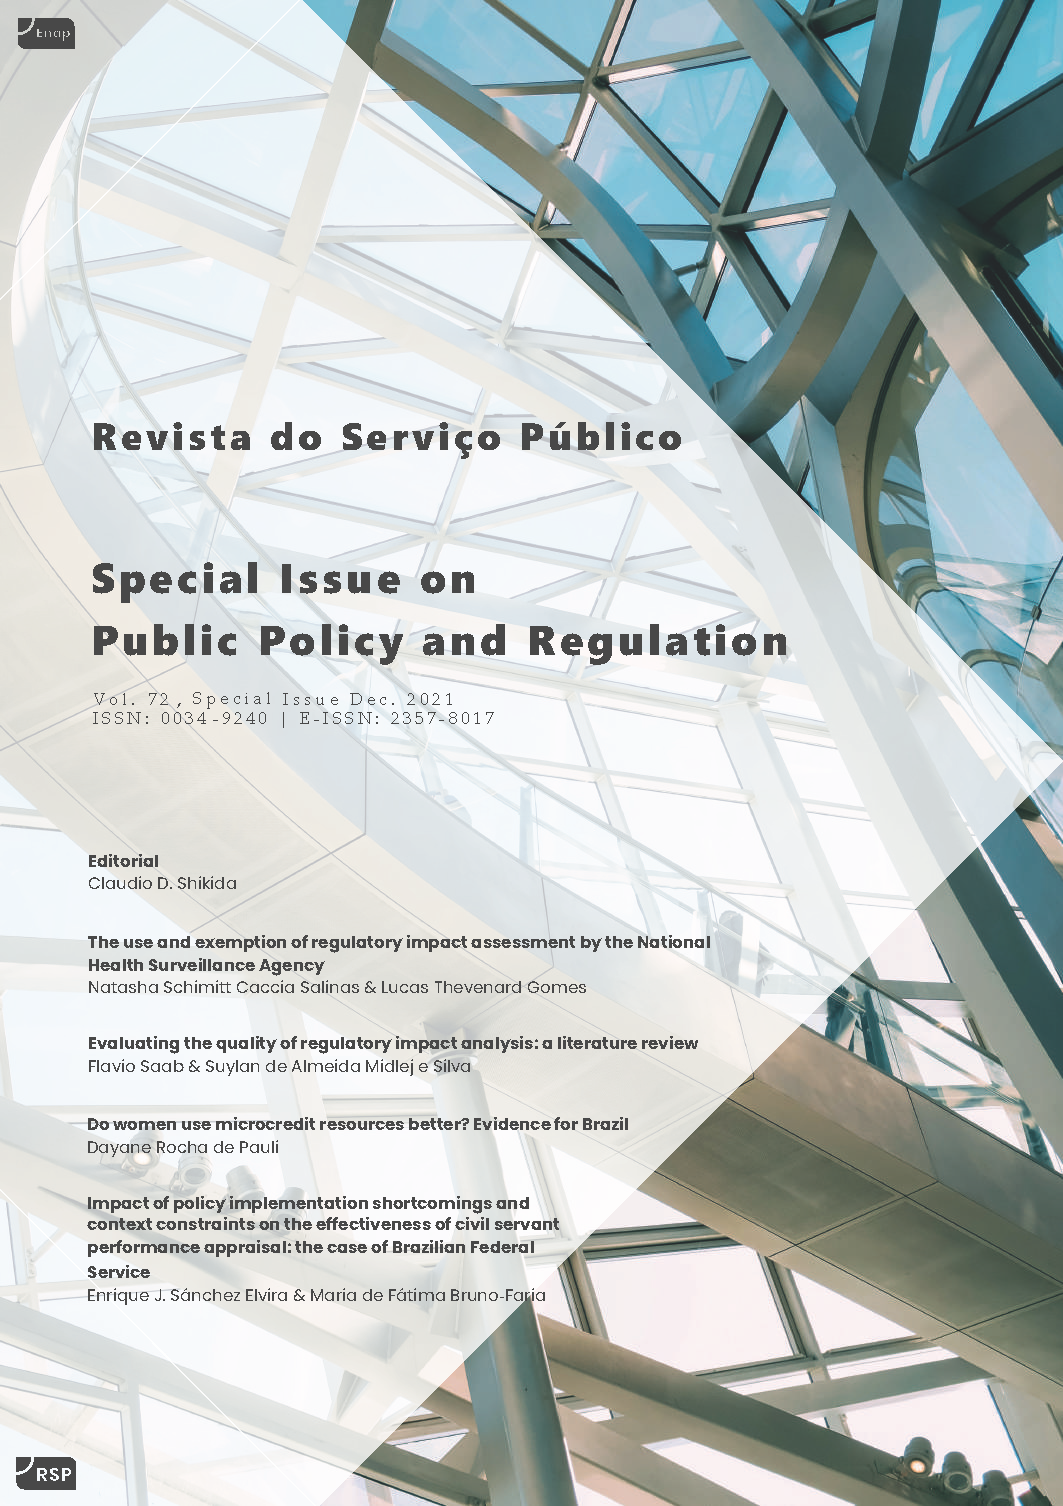 v. 72 (2021): Special Issue on Public Policy and Regulation